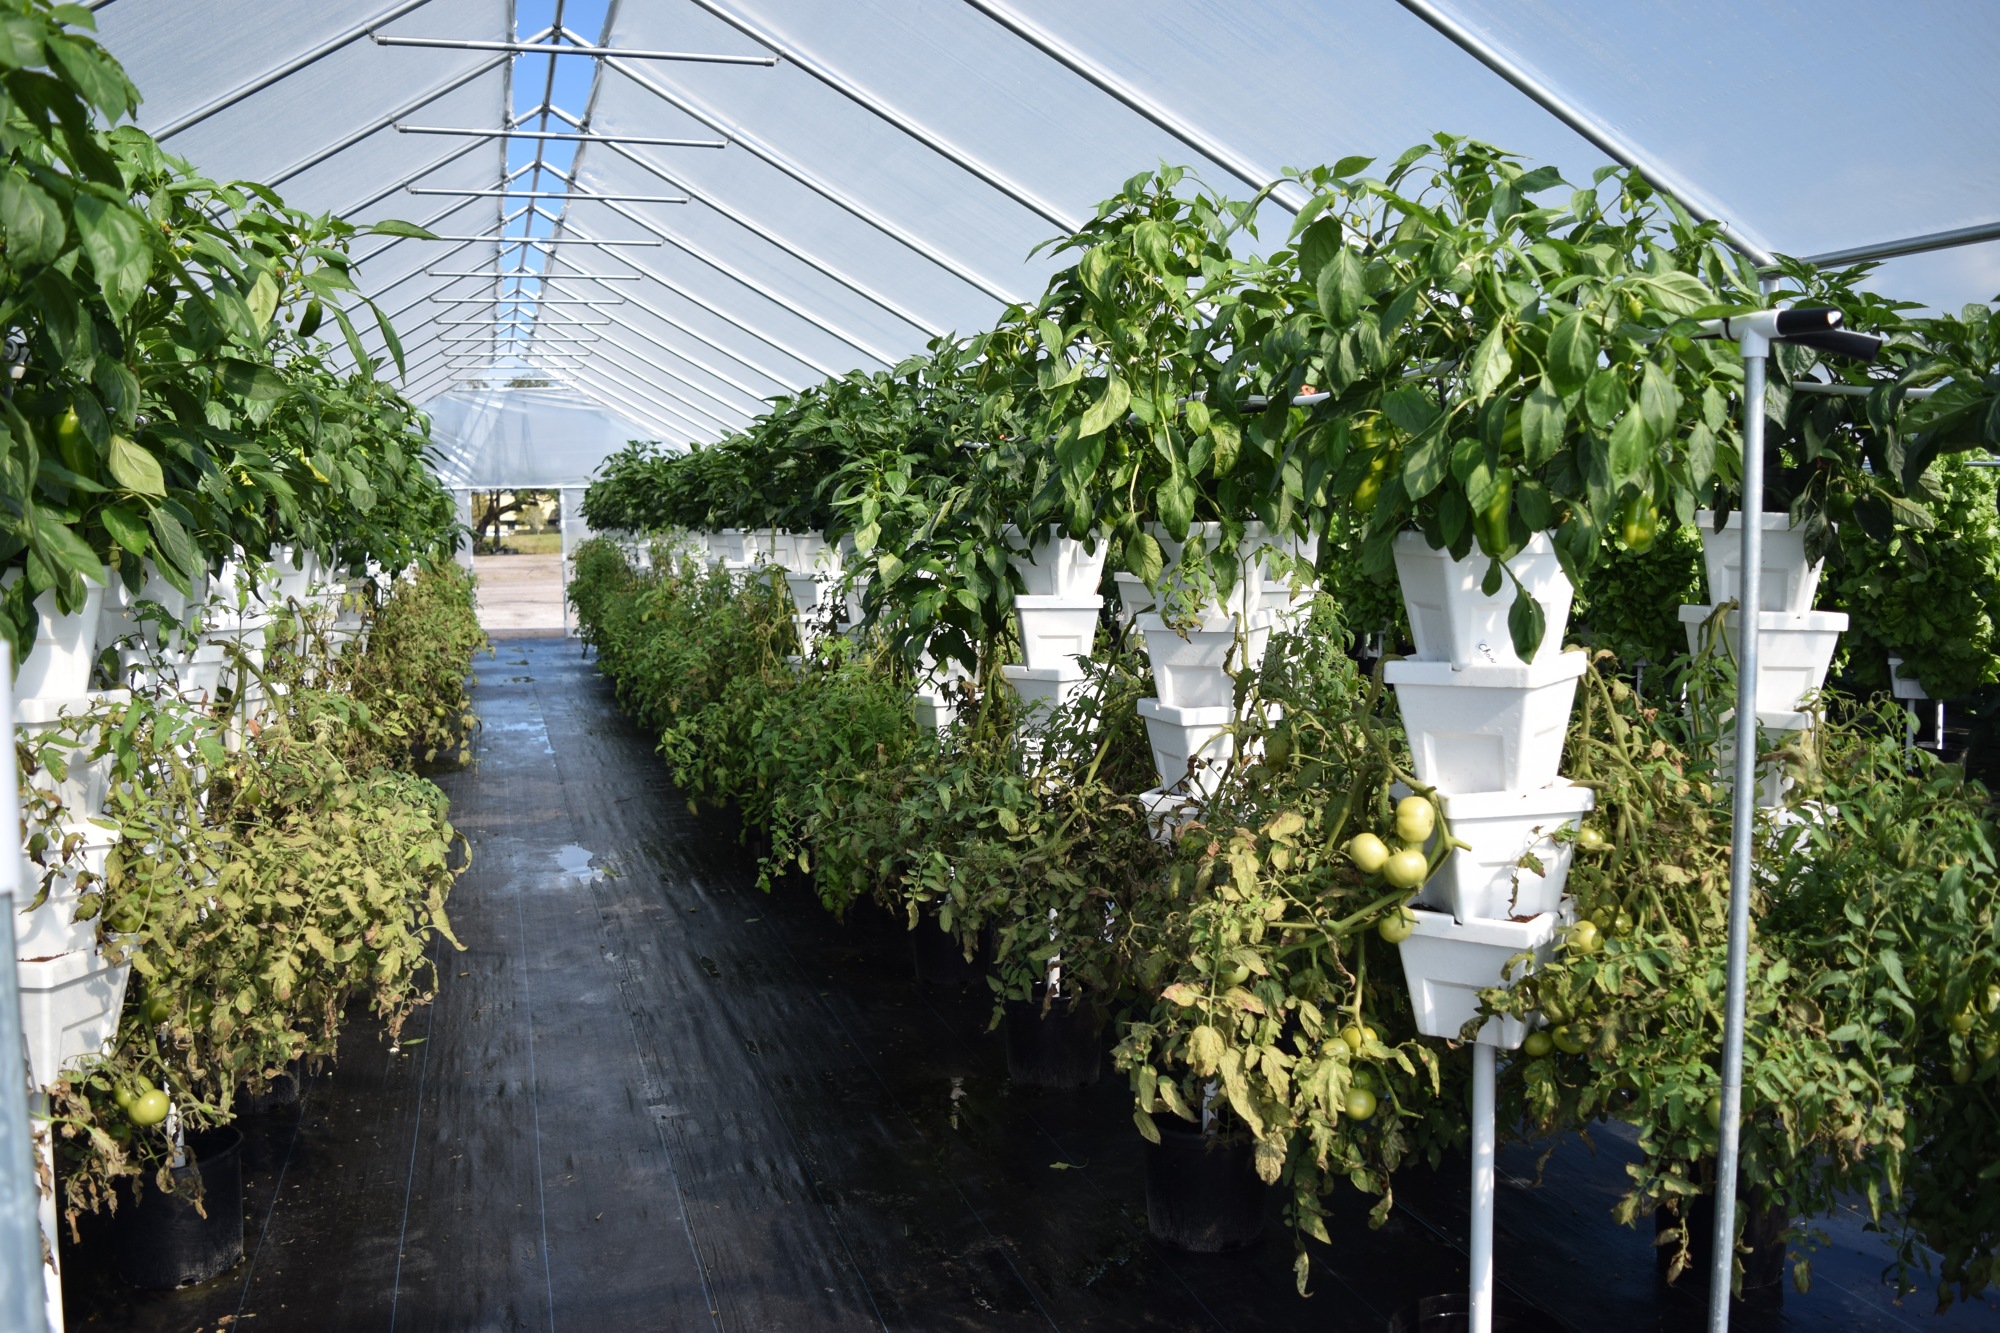 Rows of high towers are used to grow the produce. Nutrients and water are distributed through the pipes downward in each tower, dripping down to each styrofoam pot, which helps control temperature.